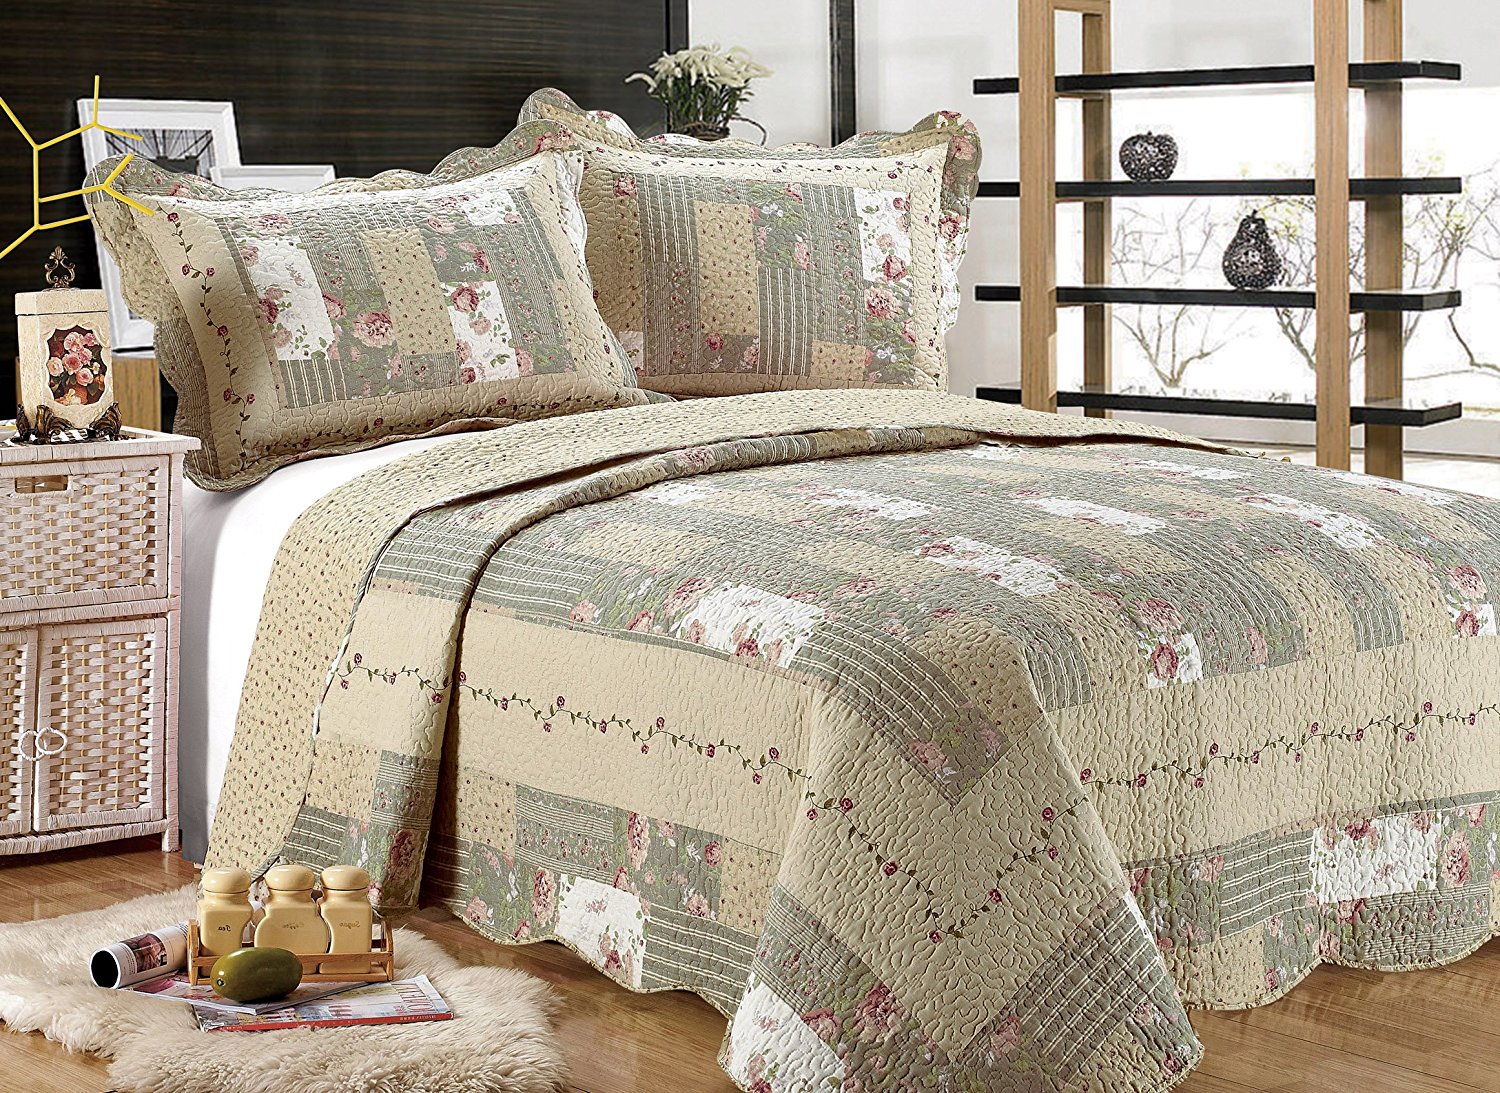 All for You 3-piece Reversible Bedspread/ Coverlet / Quilt Set-beige, pink, burgundy and sage green prints, 100"x110", (larger king with king size pillow shams)